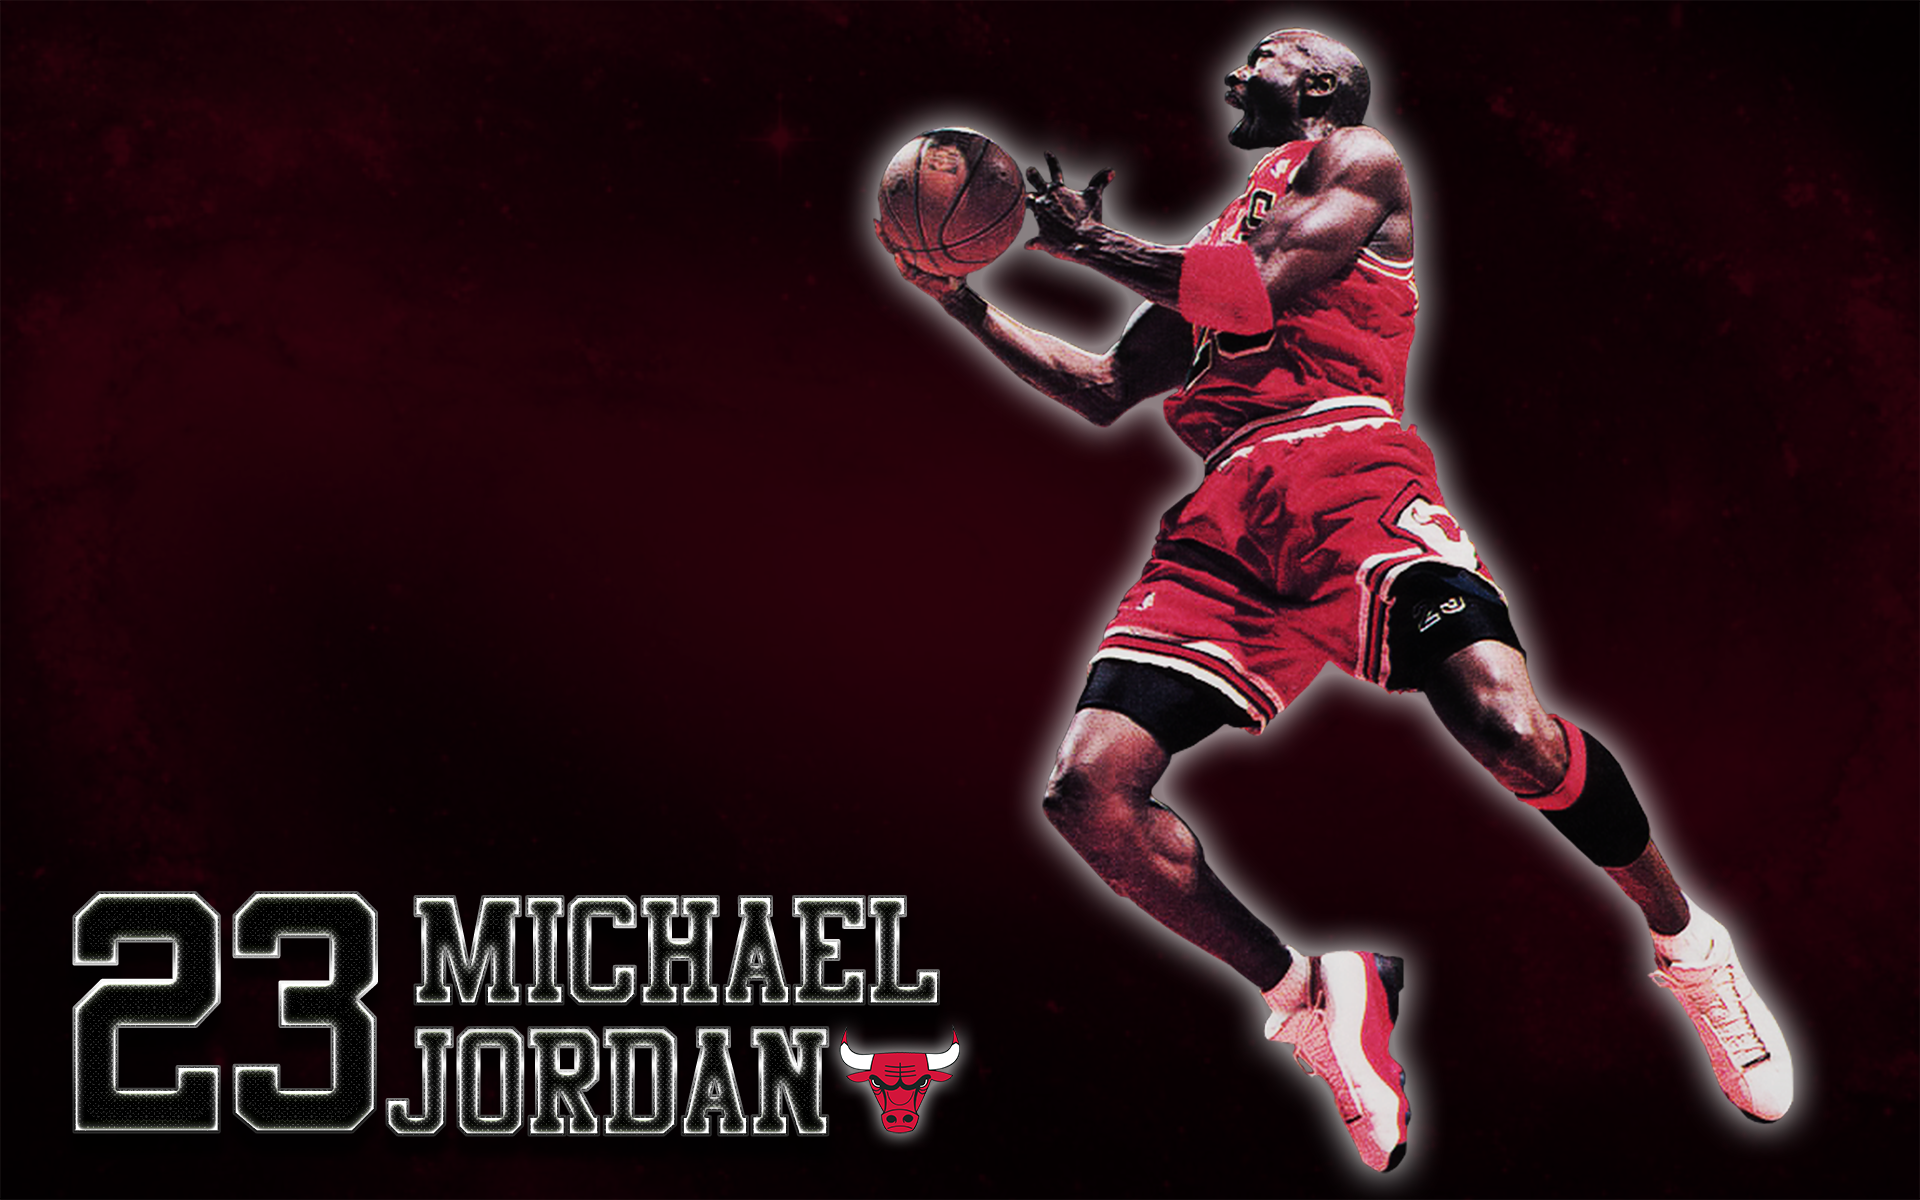 Michael Jordan ranked the best chicago bull player of all time